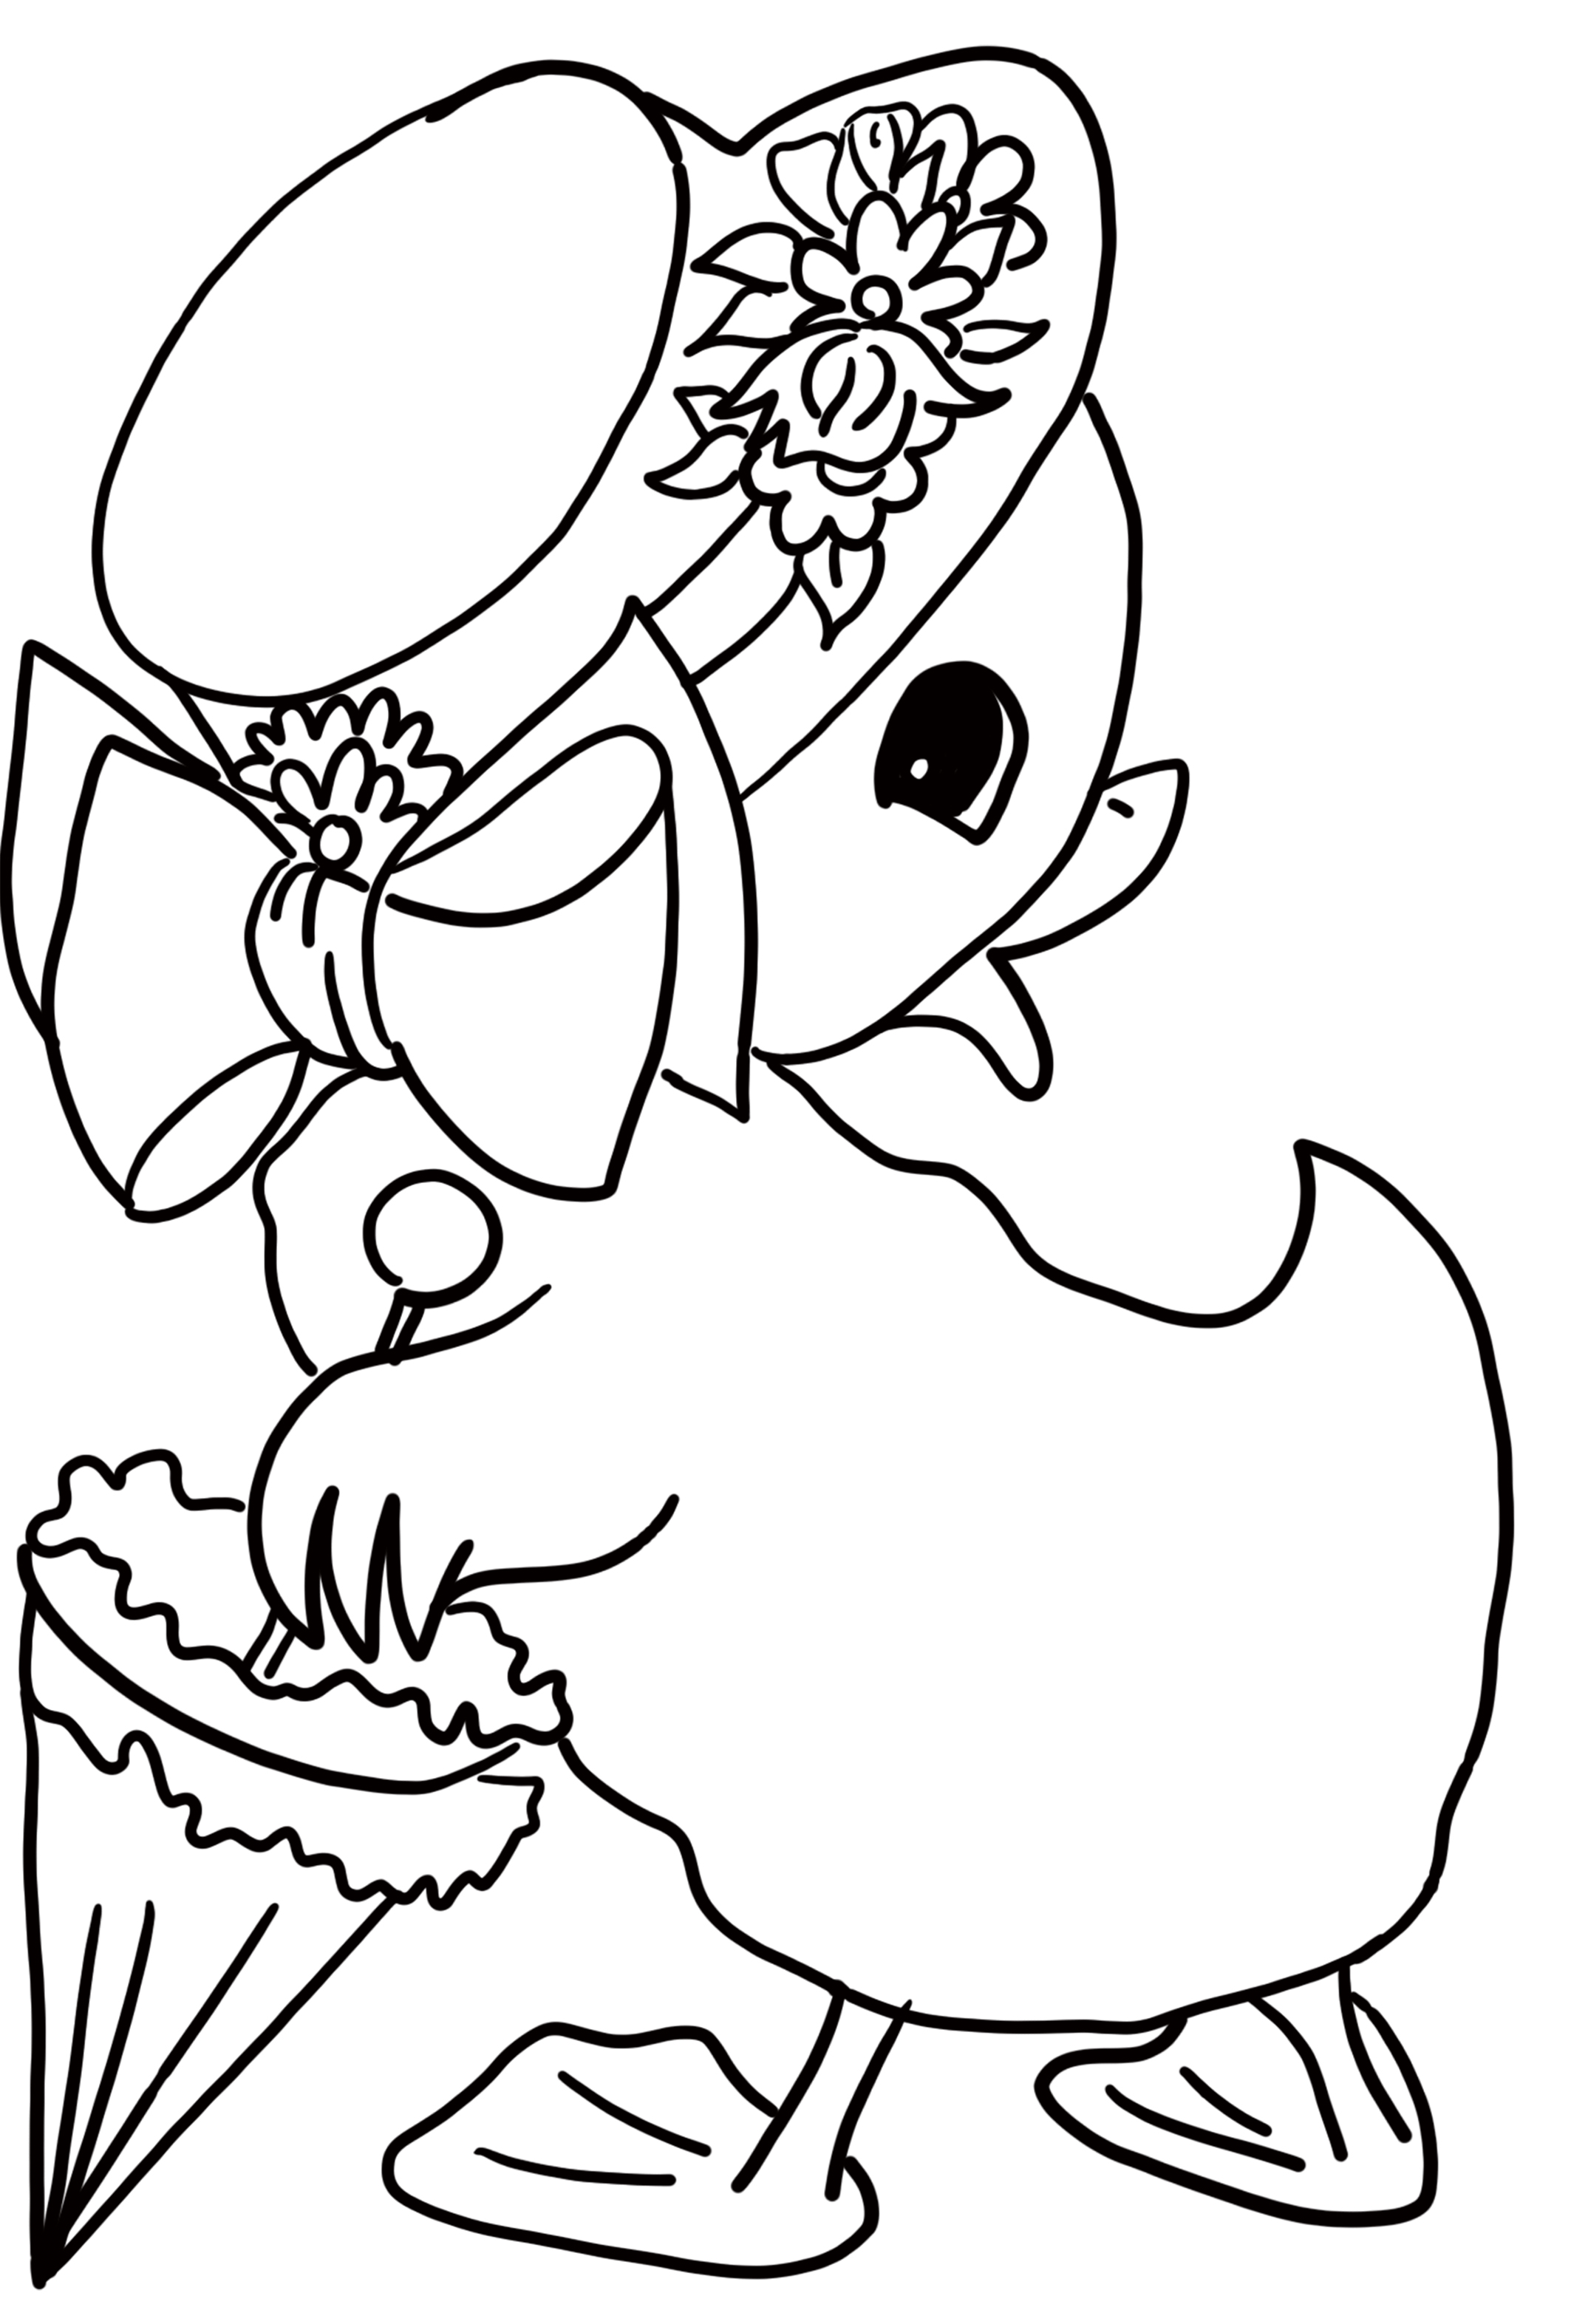 60 Coloring Pages To Print Cute  Free